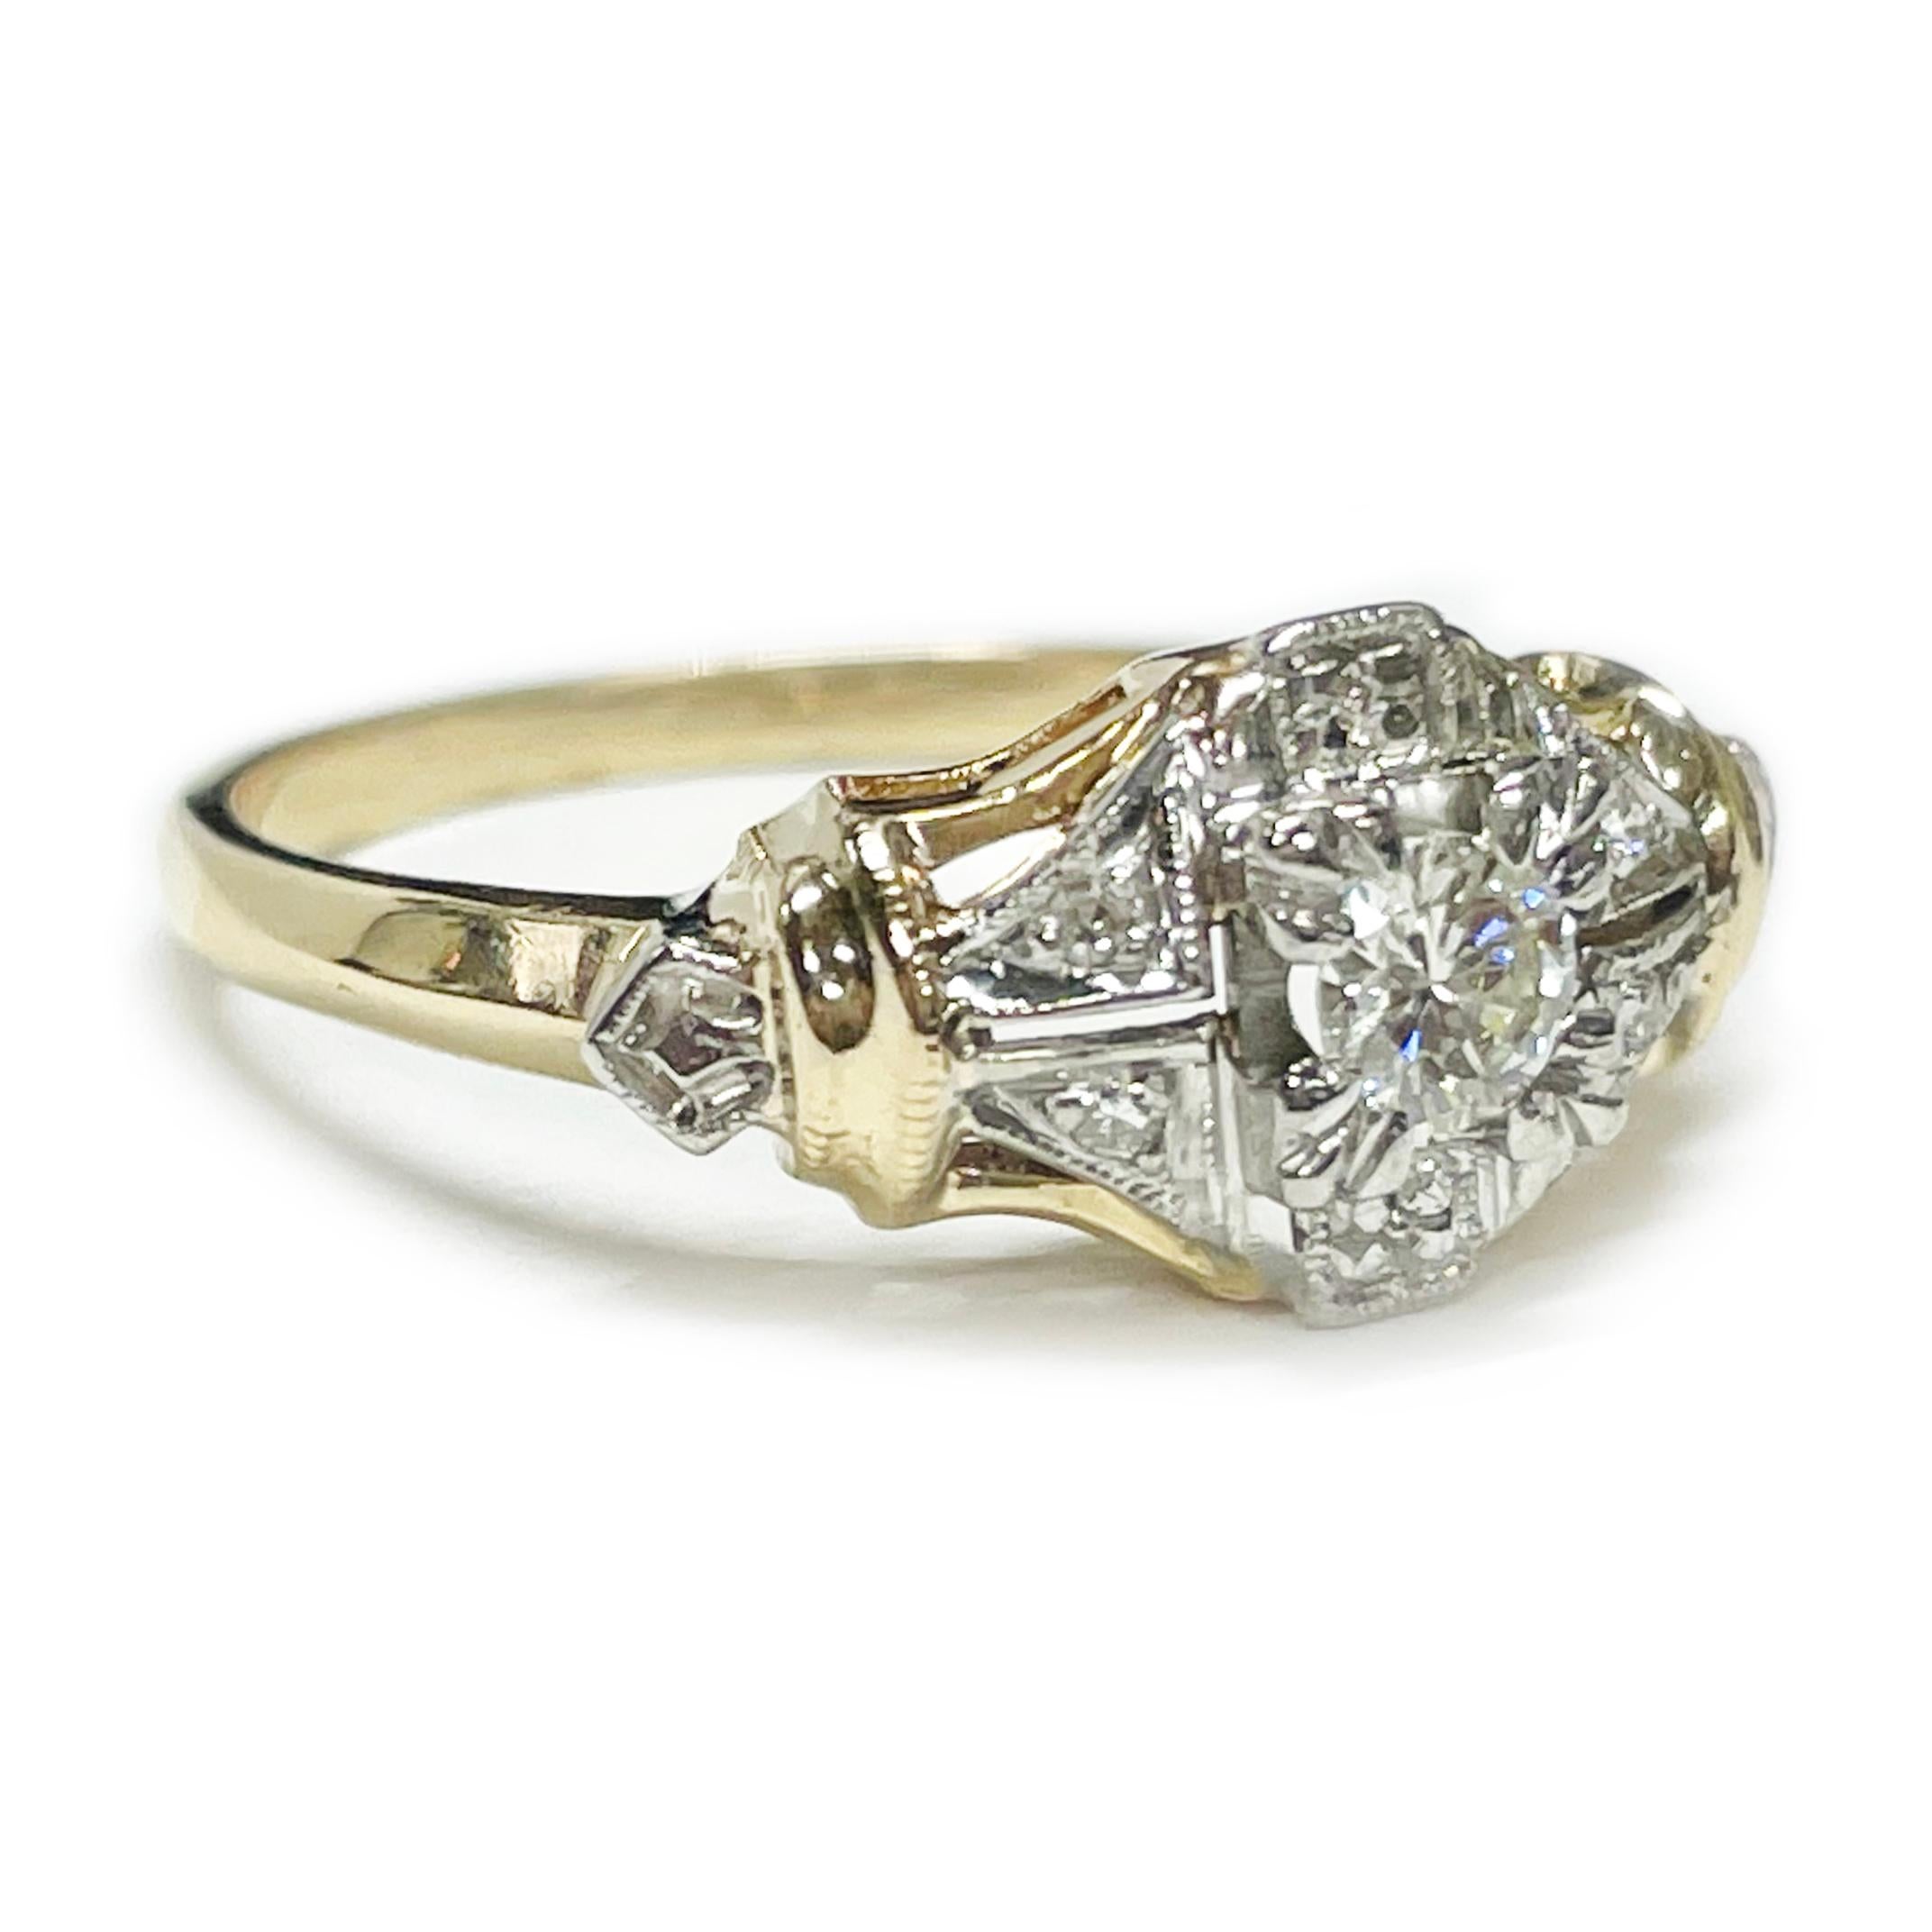 Art Deco Style (replica) yellow and white Gold Diamond Ring. The ring features a round brilliant-cut center diamond measuring 3mm. There are also four round melee diamonds and some diamond-cut settings. There is yellow and white gold milgrain detail